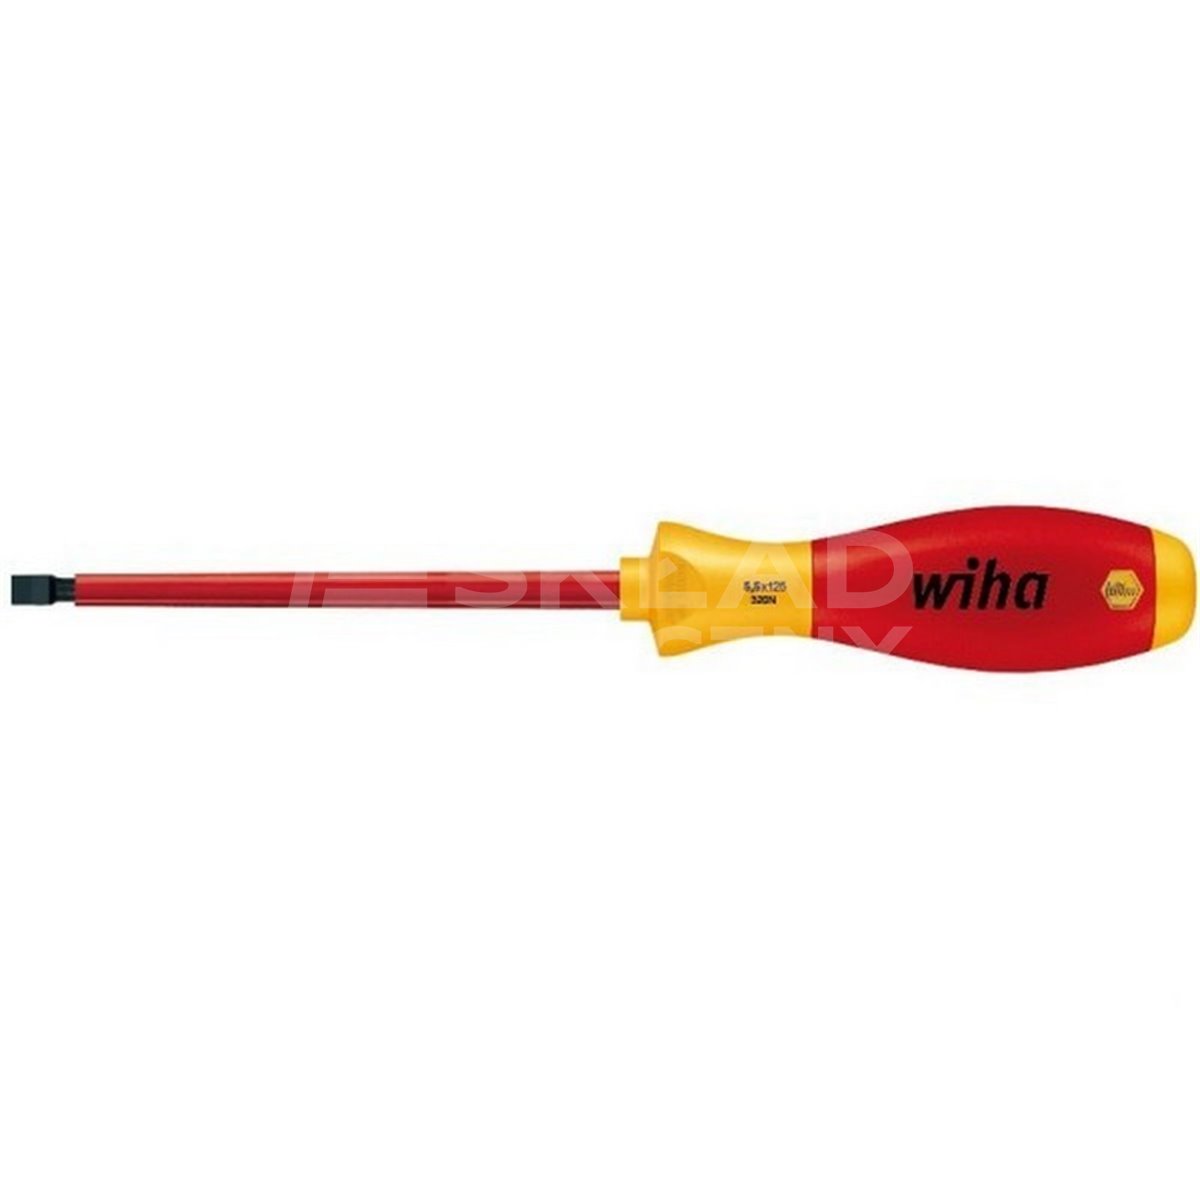 SoftFinish electric VDE 320N 2.5 75mm flat screwdriver by Wiha 00820.